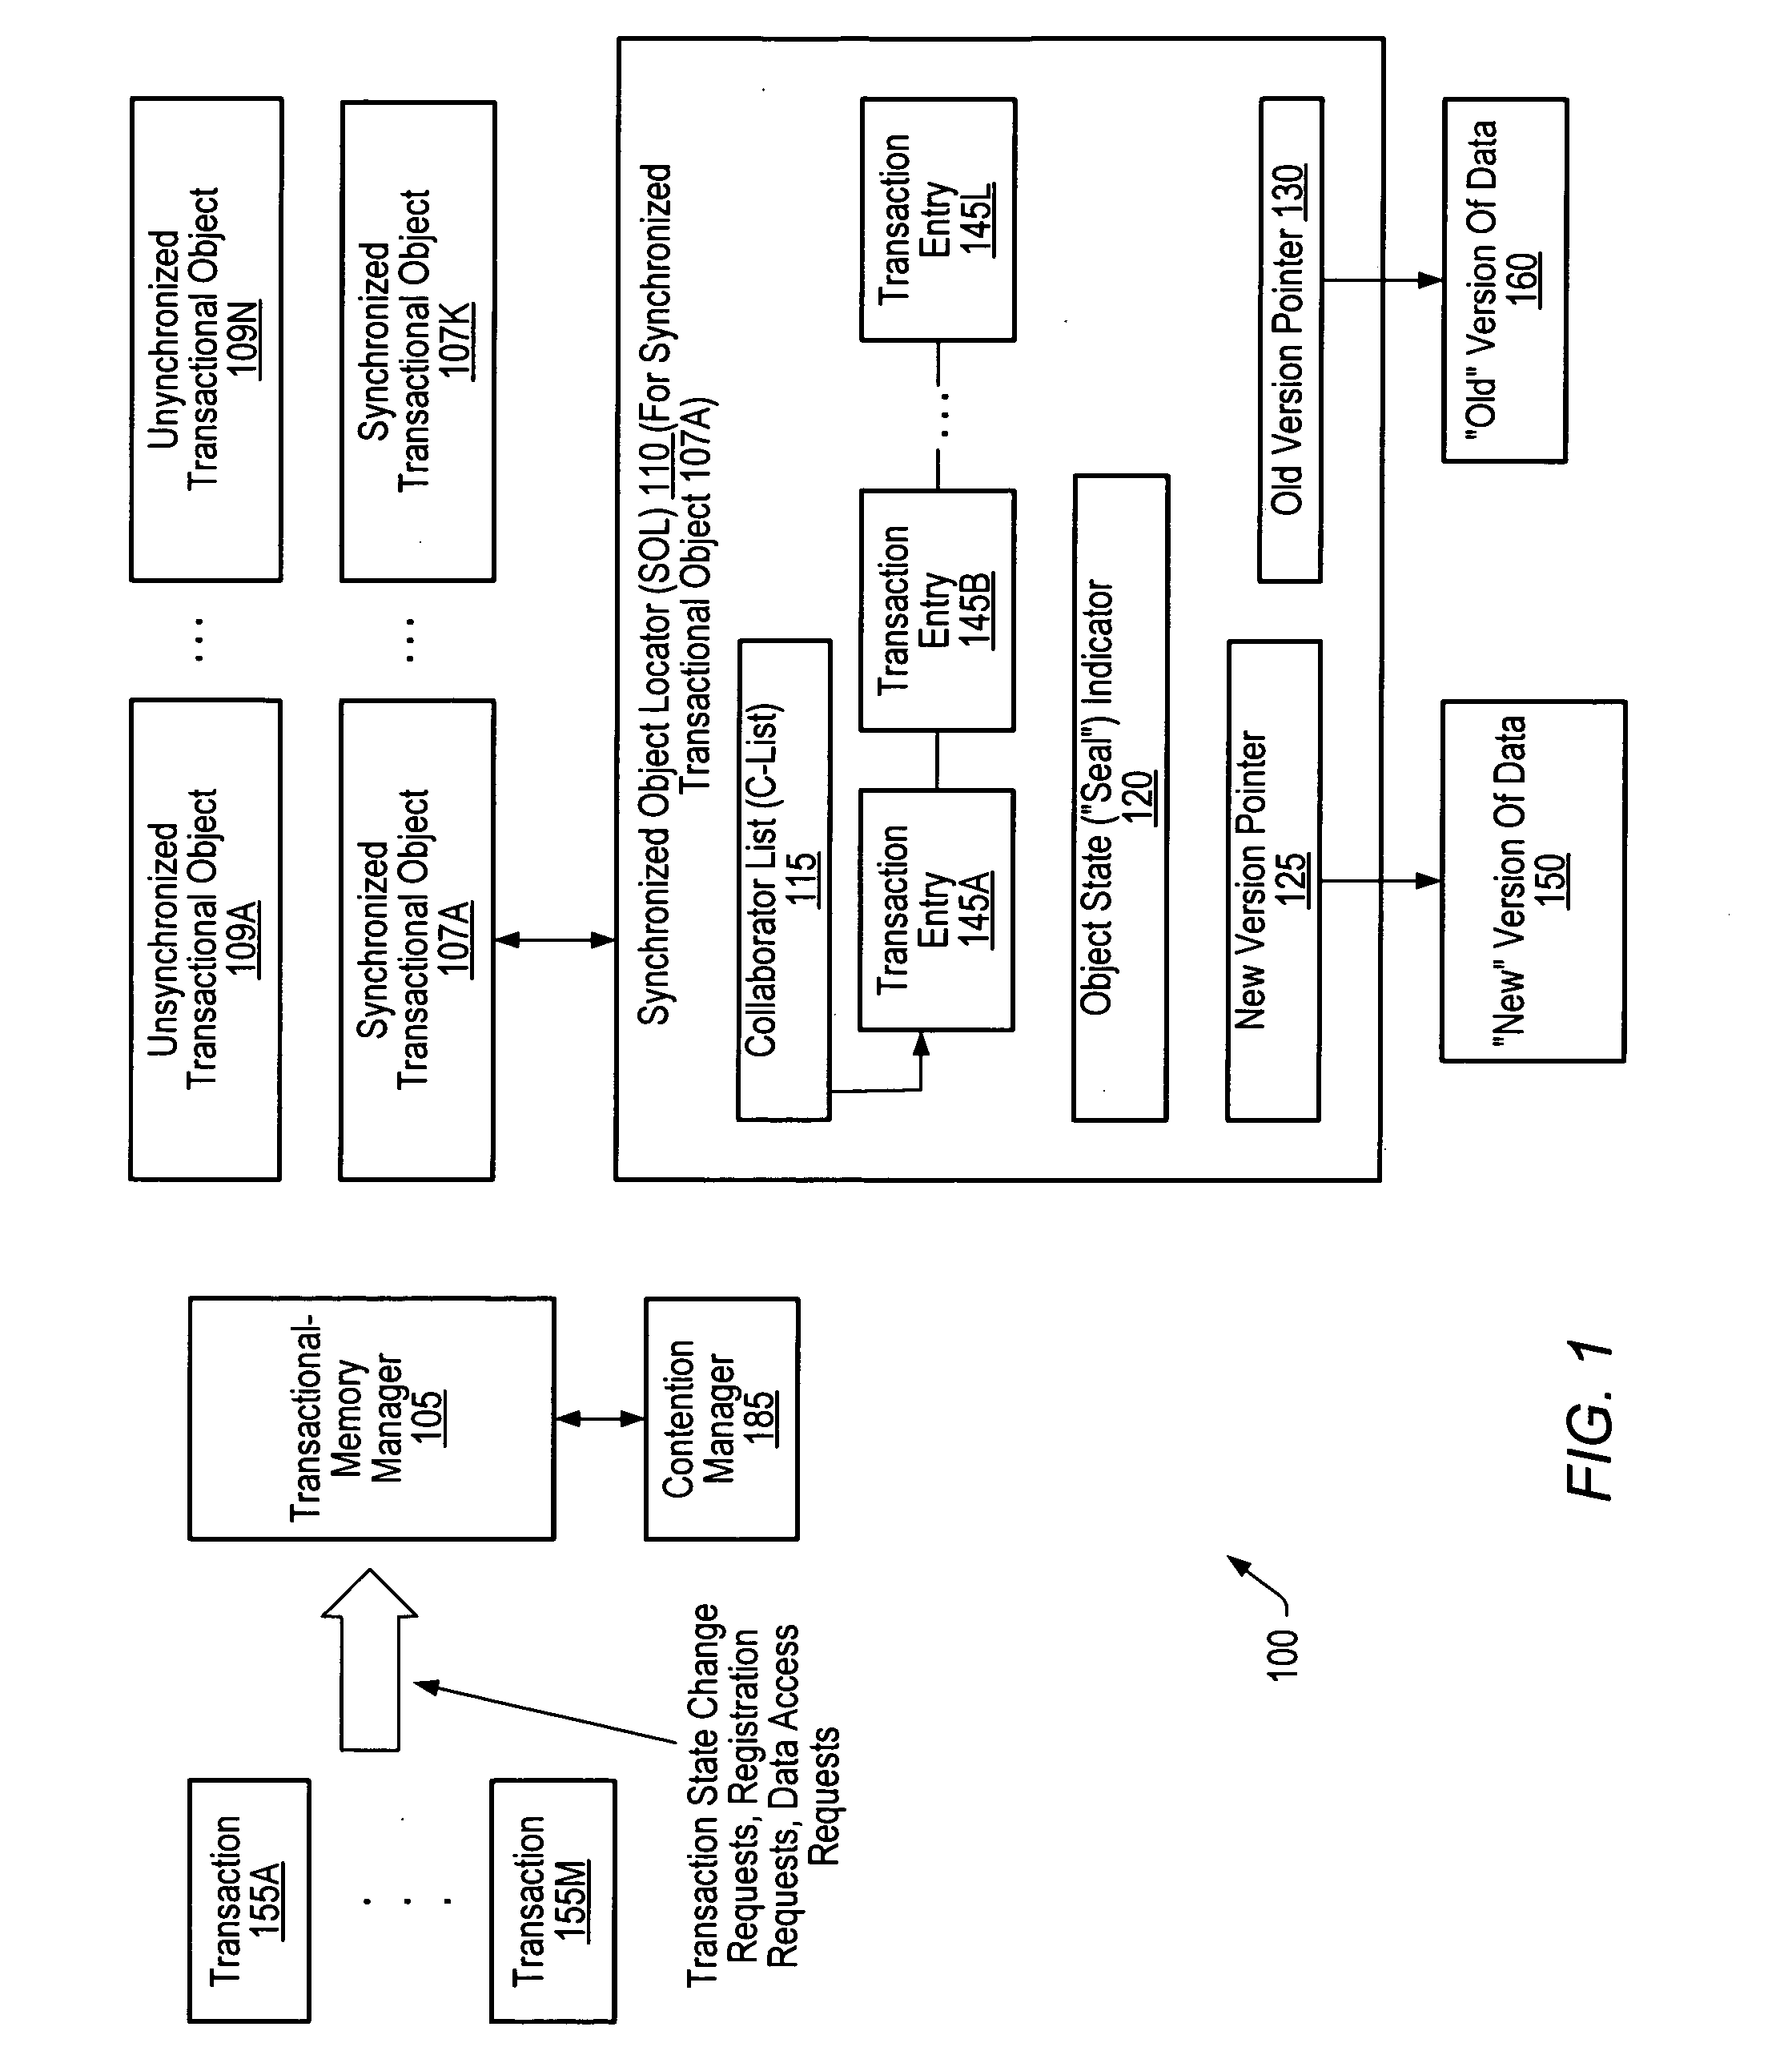 Synchronized objects for software transactional memory